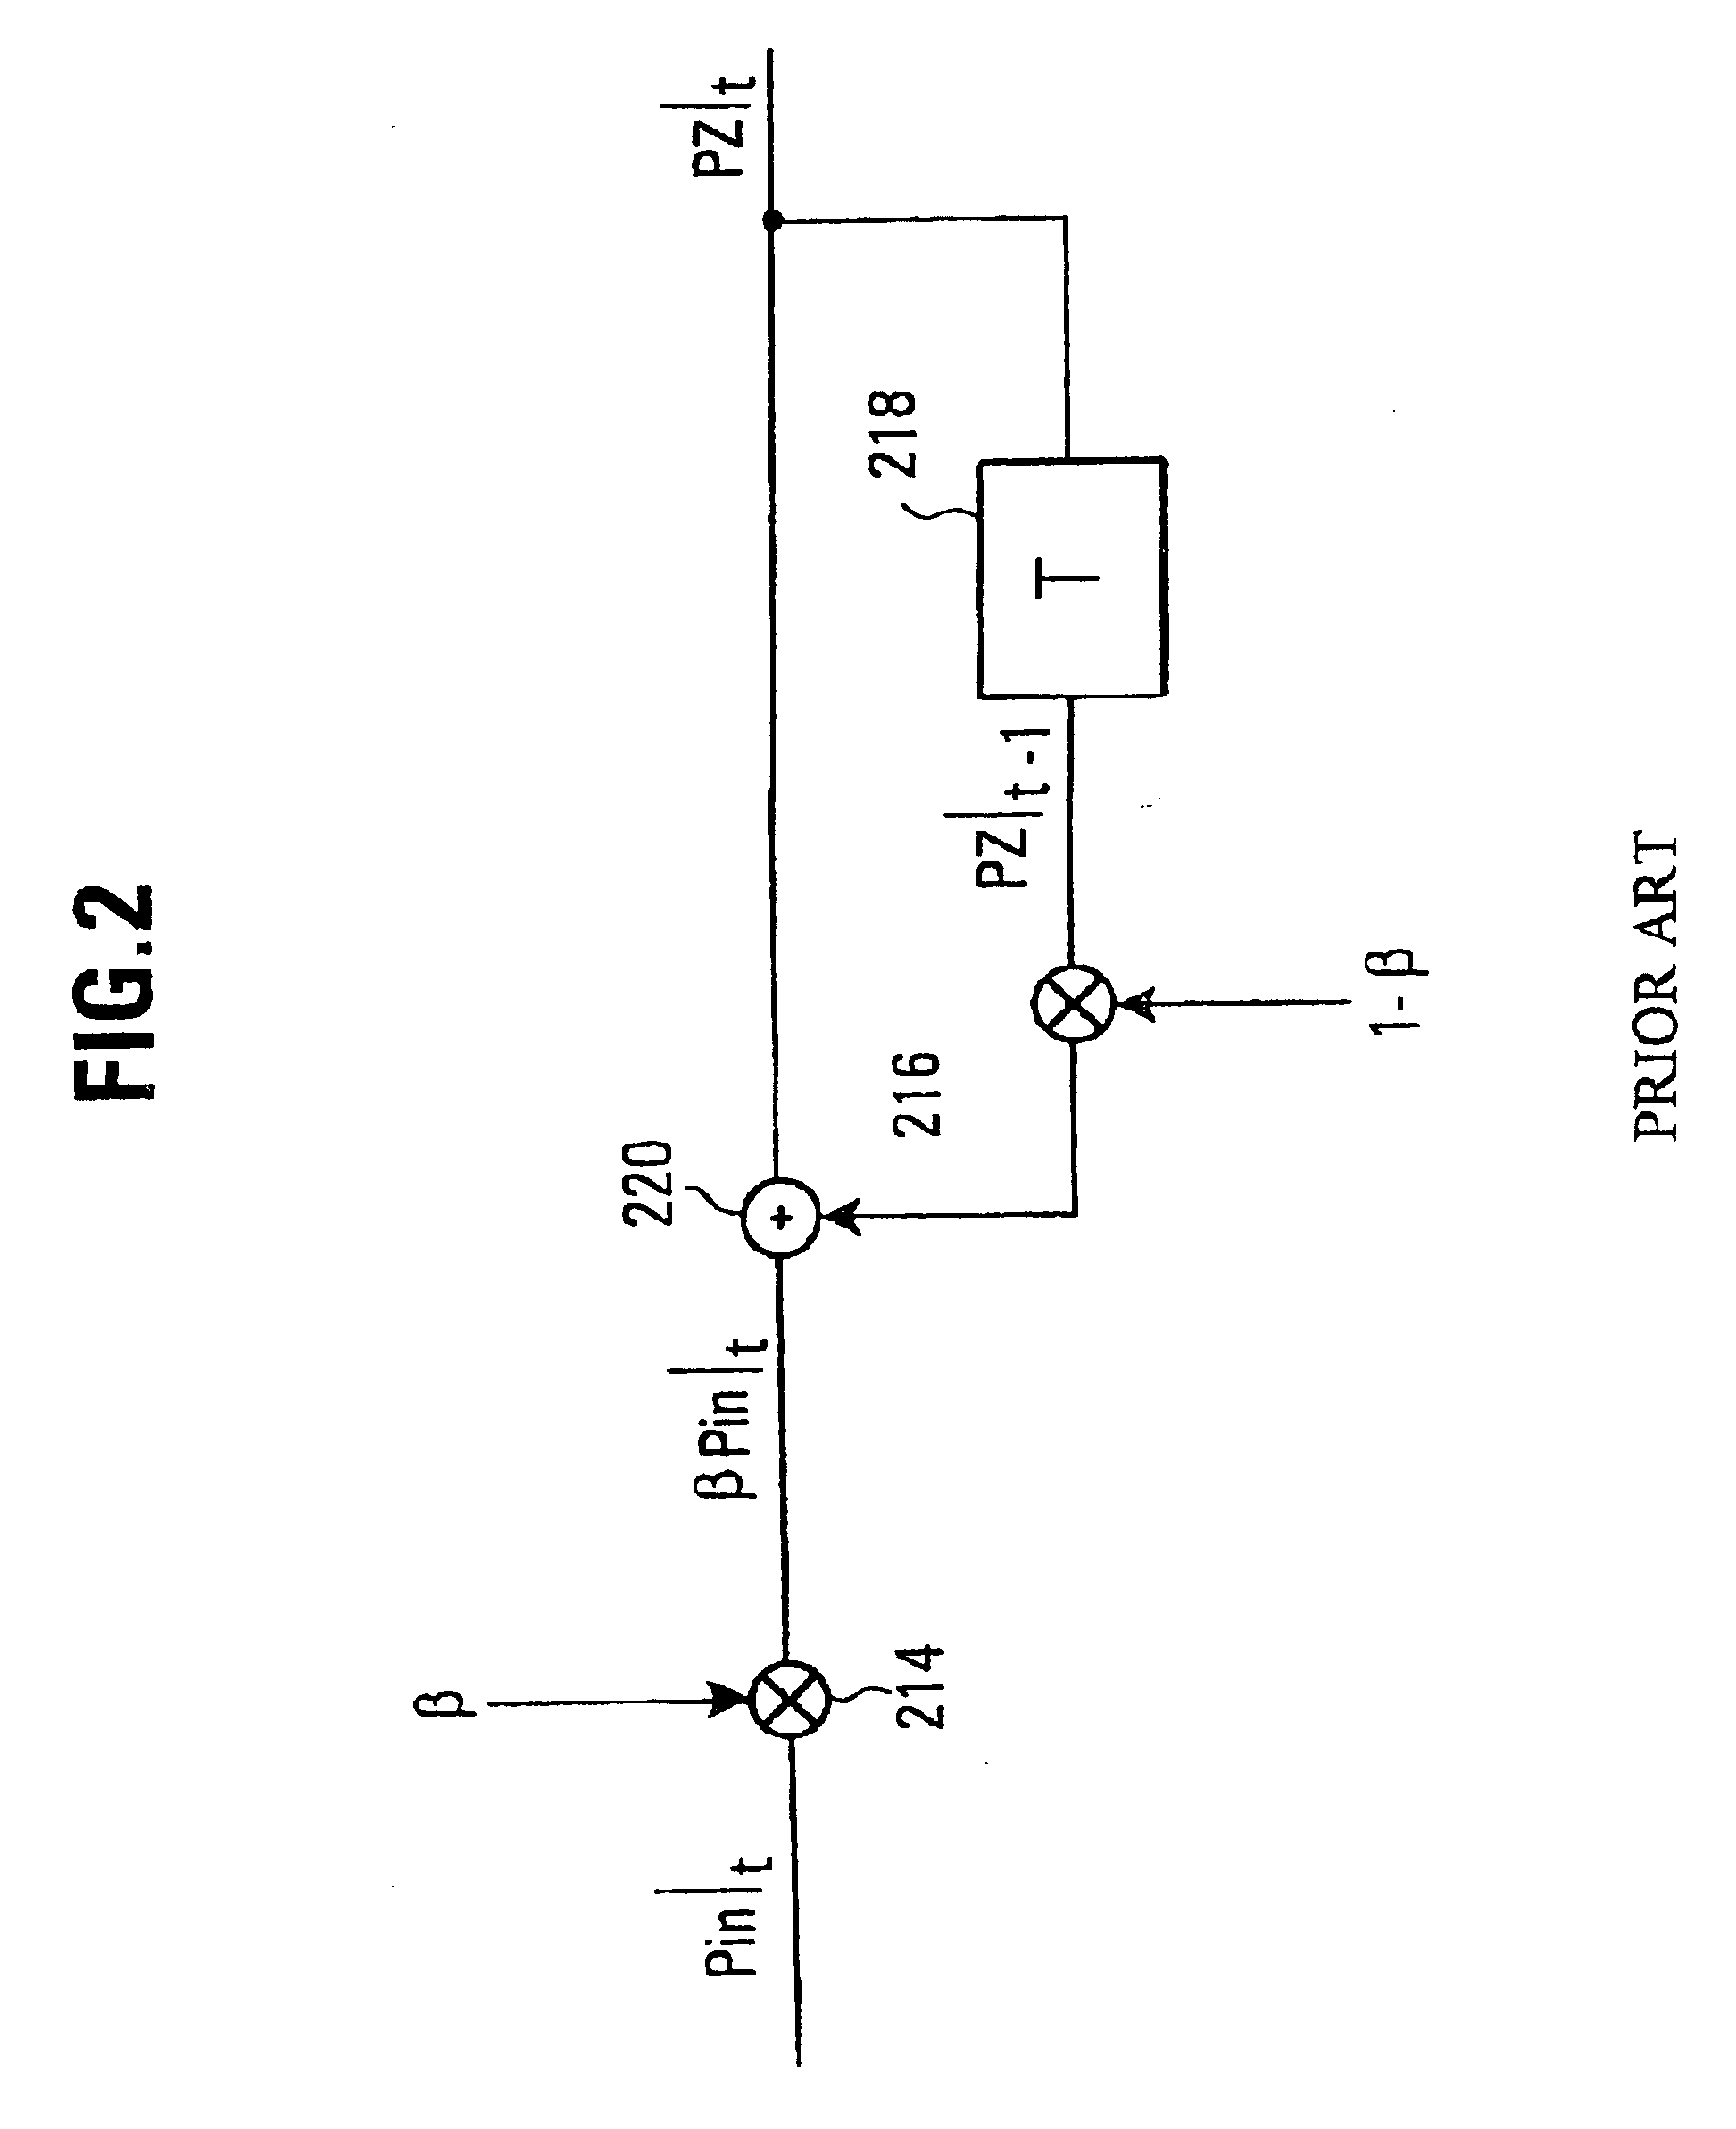 Digital adaptive filter and acoustic echo canceller using the same